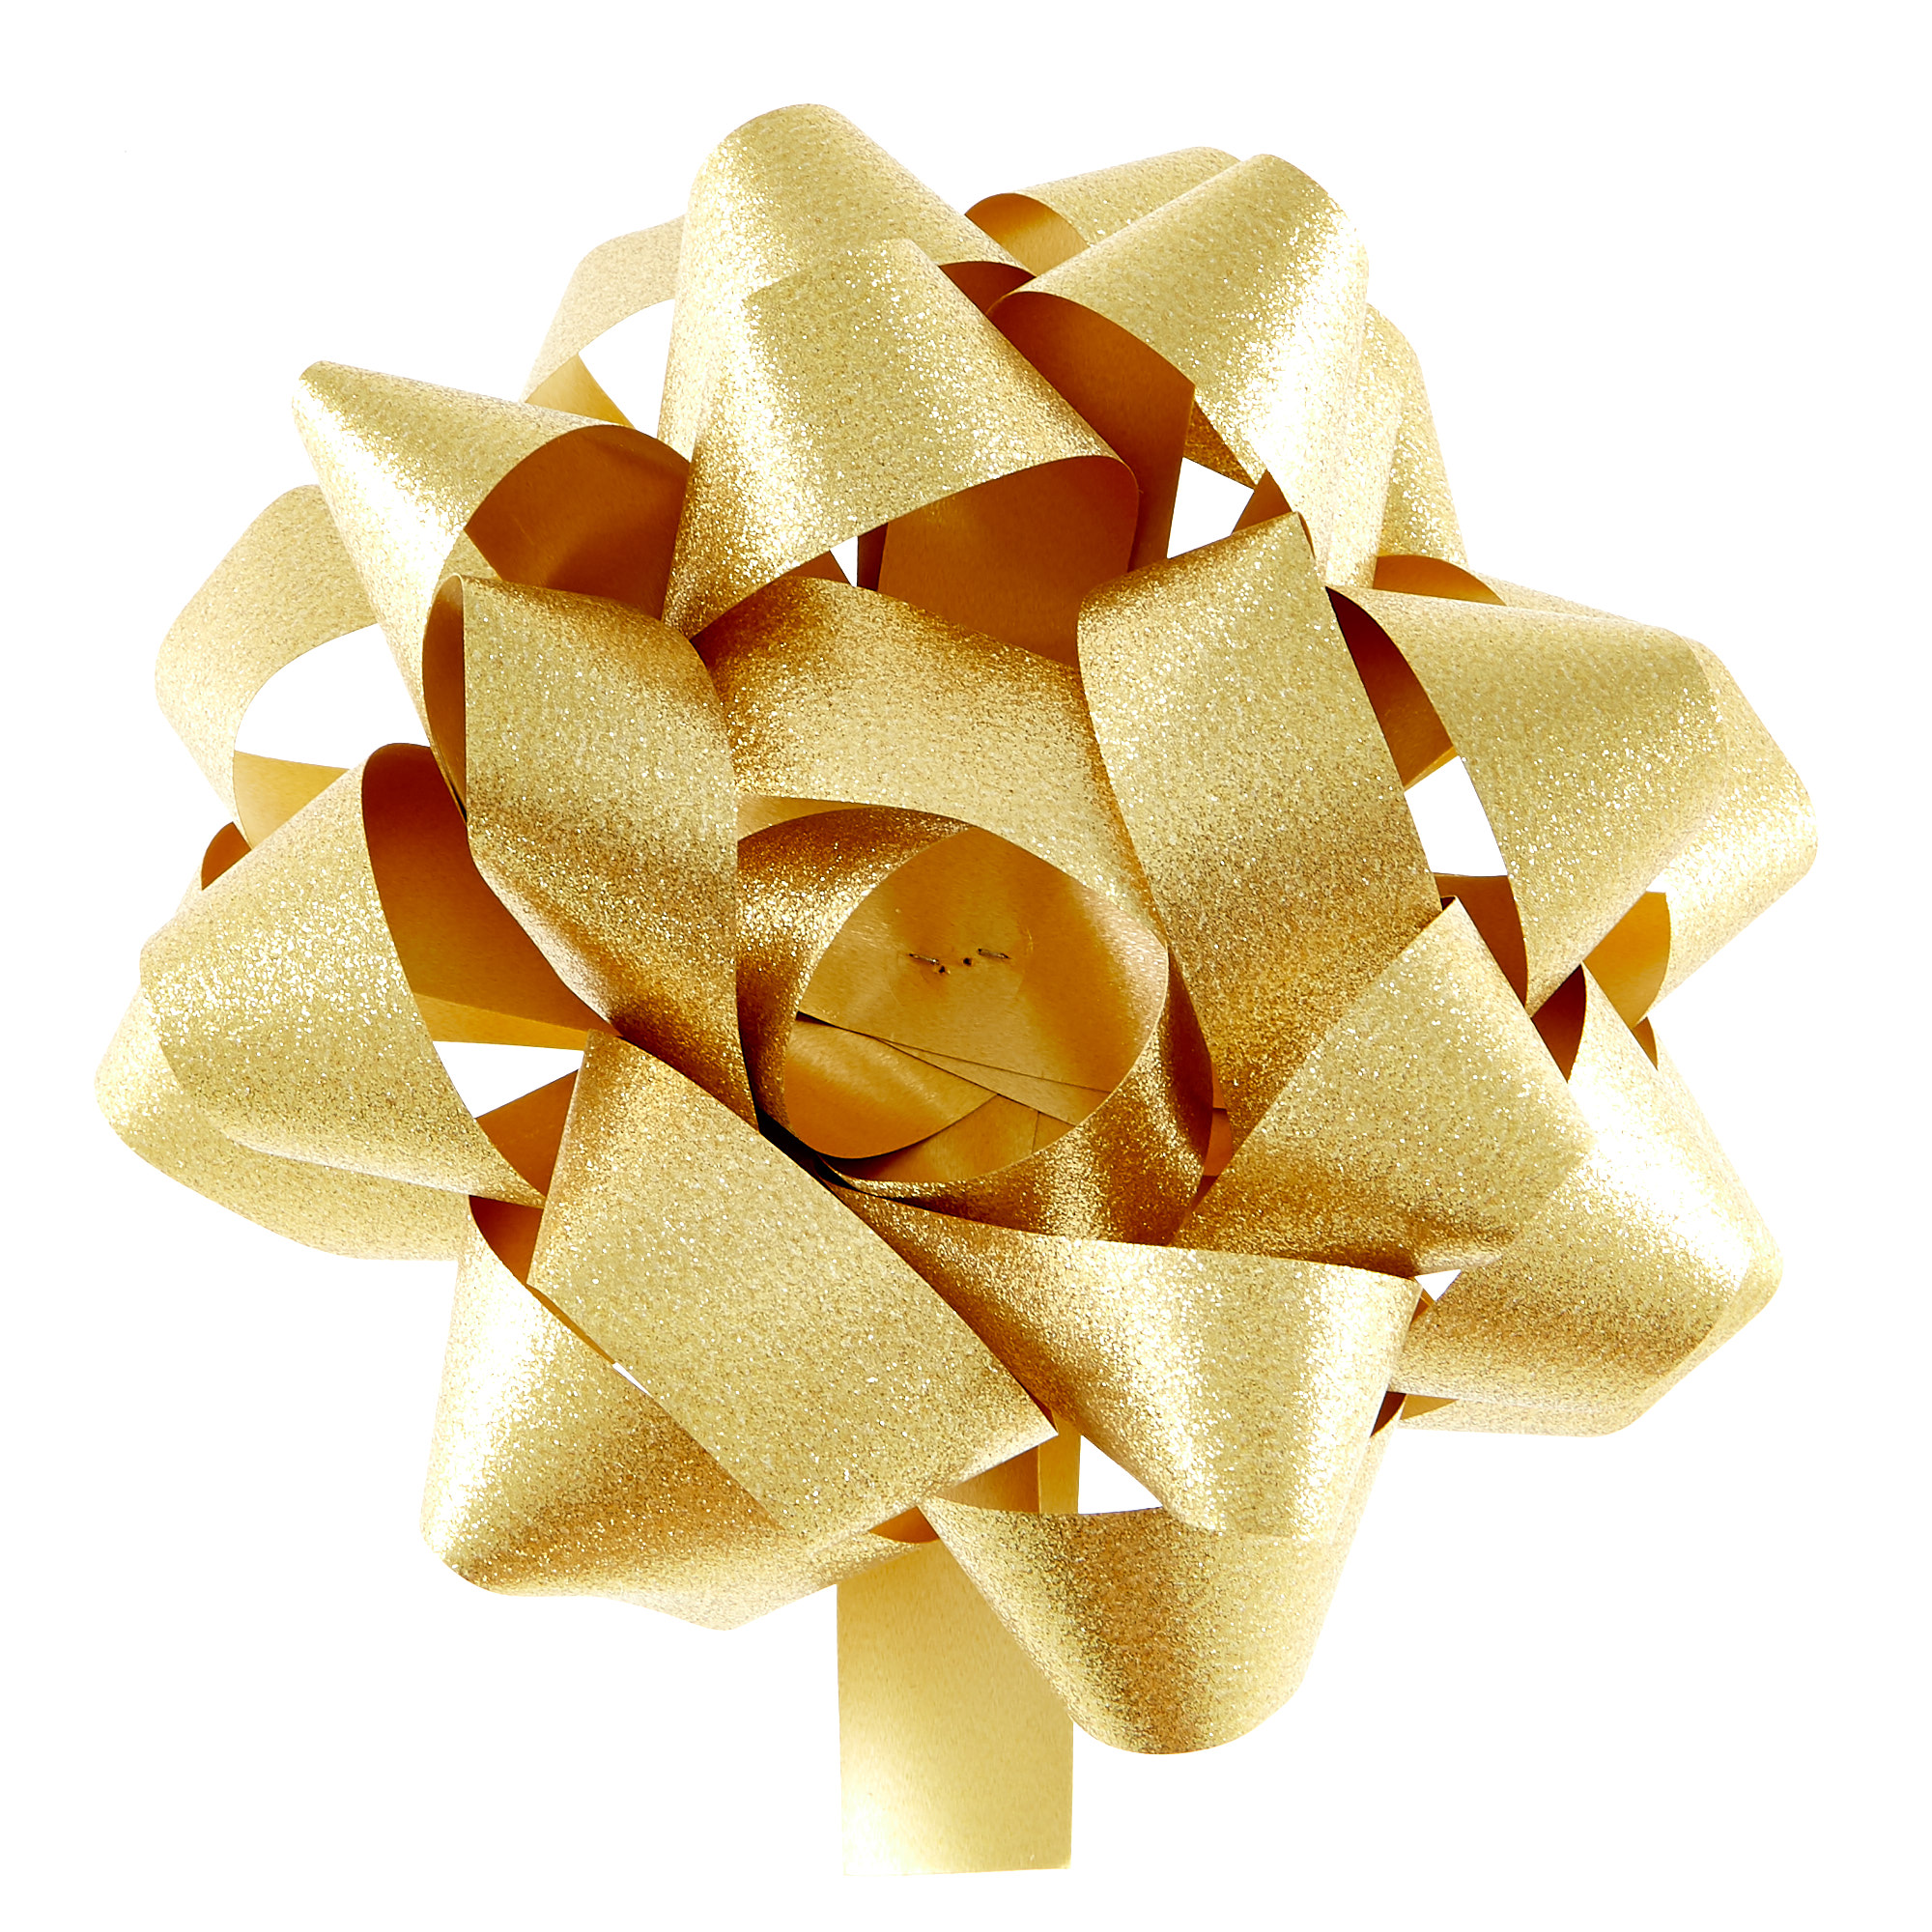 Giant Gold Gift Bow 